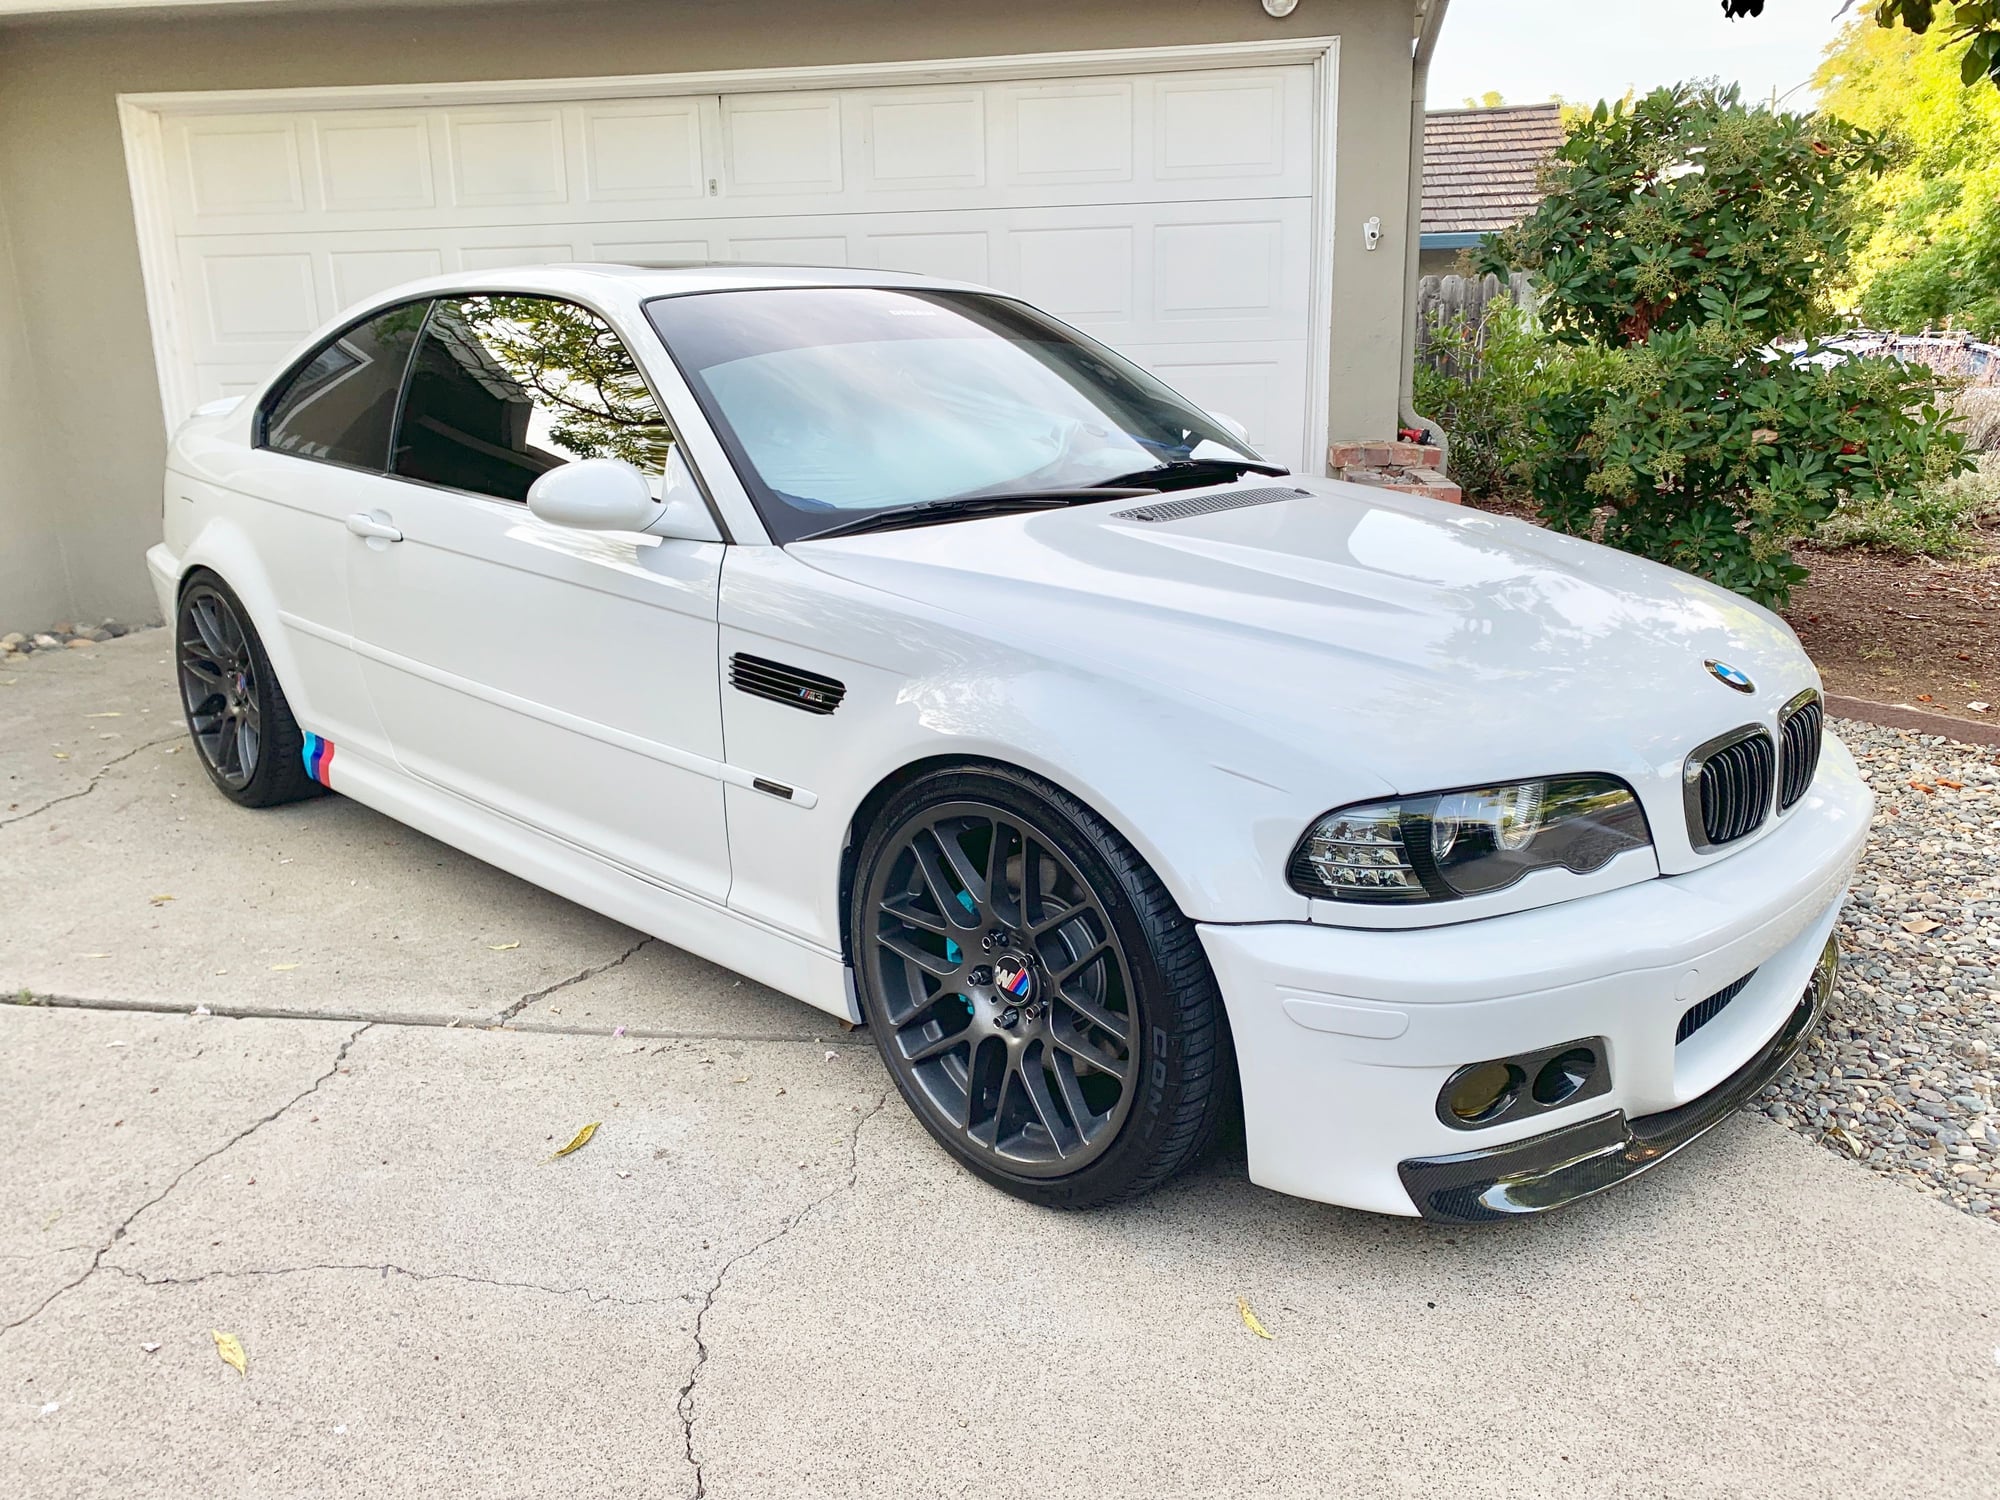 2005 BMW M3 - 2005 BMW M3 - Used - VIN WBSBL93435PN60119 - 106,400 Miles - 2WD - Manual - Coupe - White - San Jose, CA 95124, United States